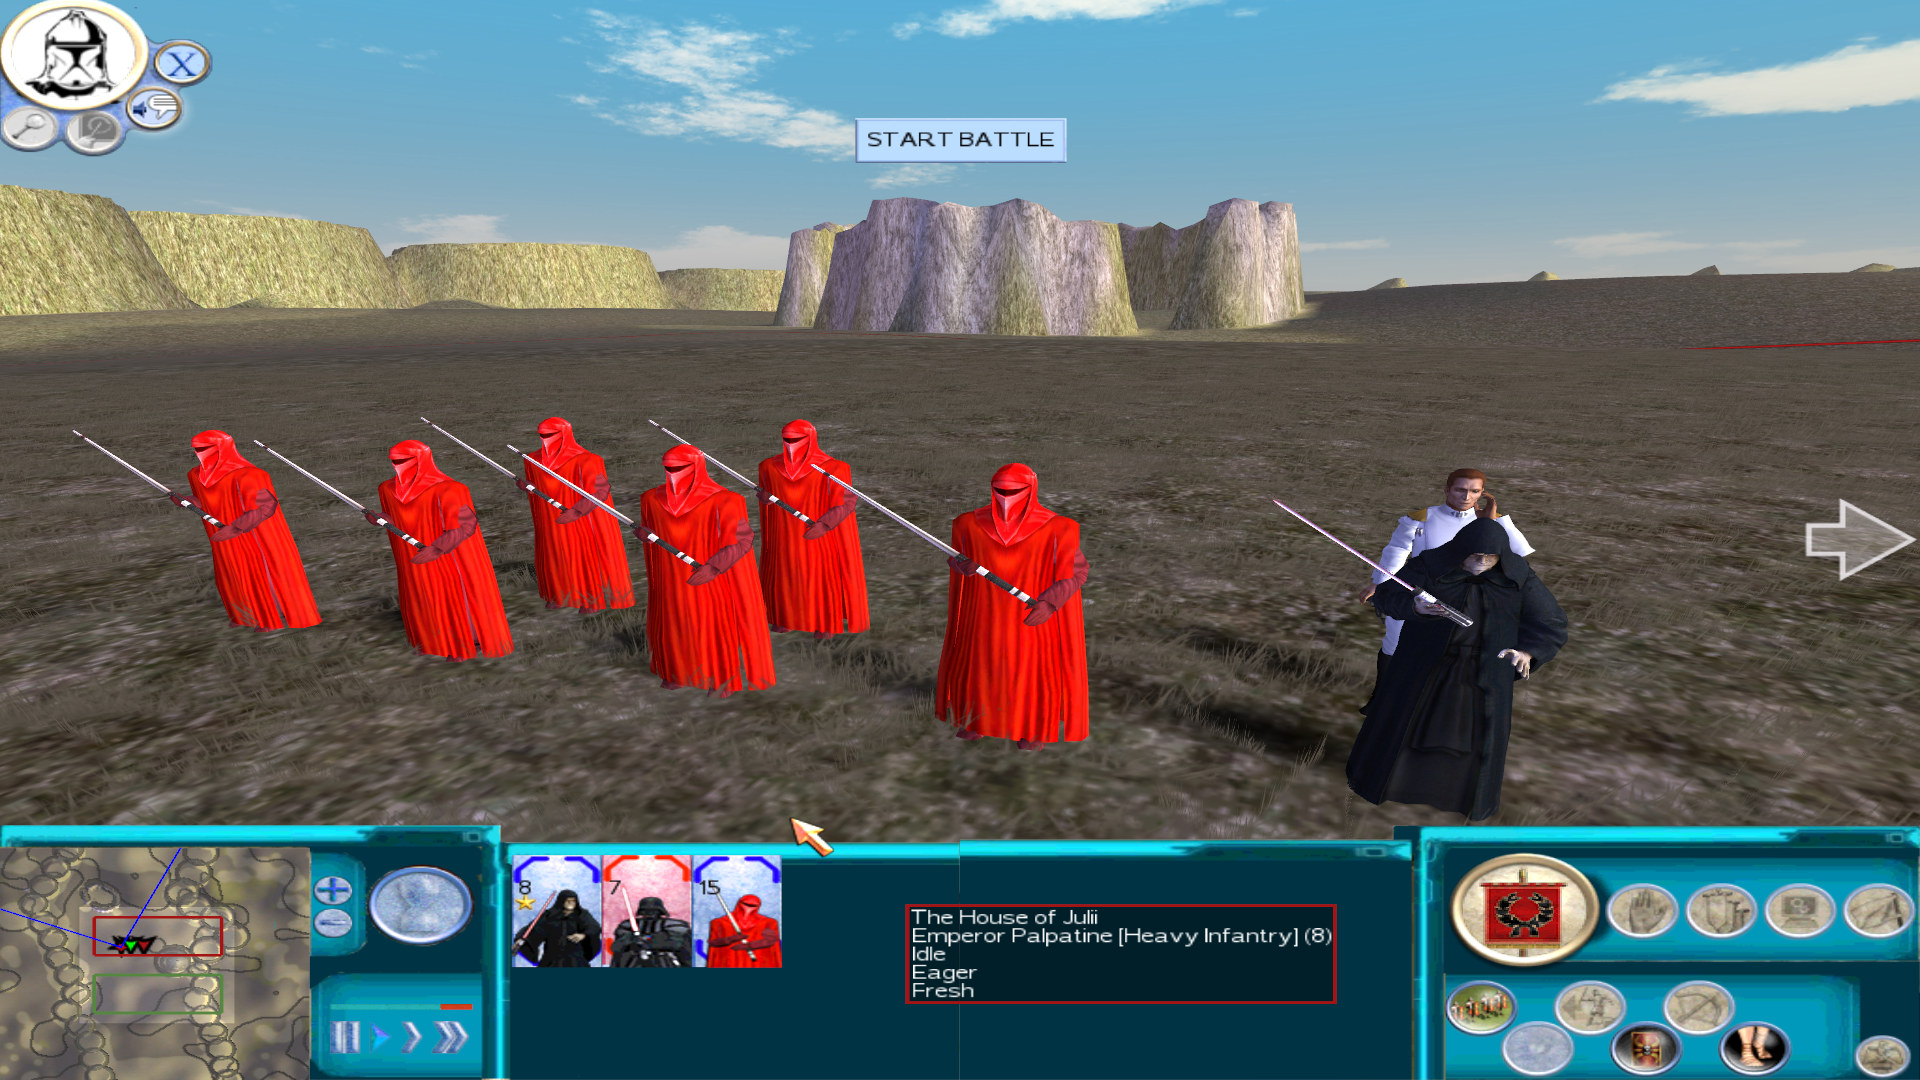 Star Wars Total War - Emperor Palpatine with a Red Guard boyguard!